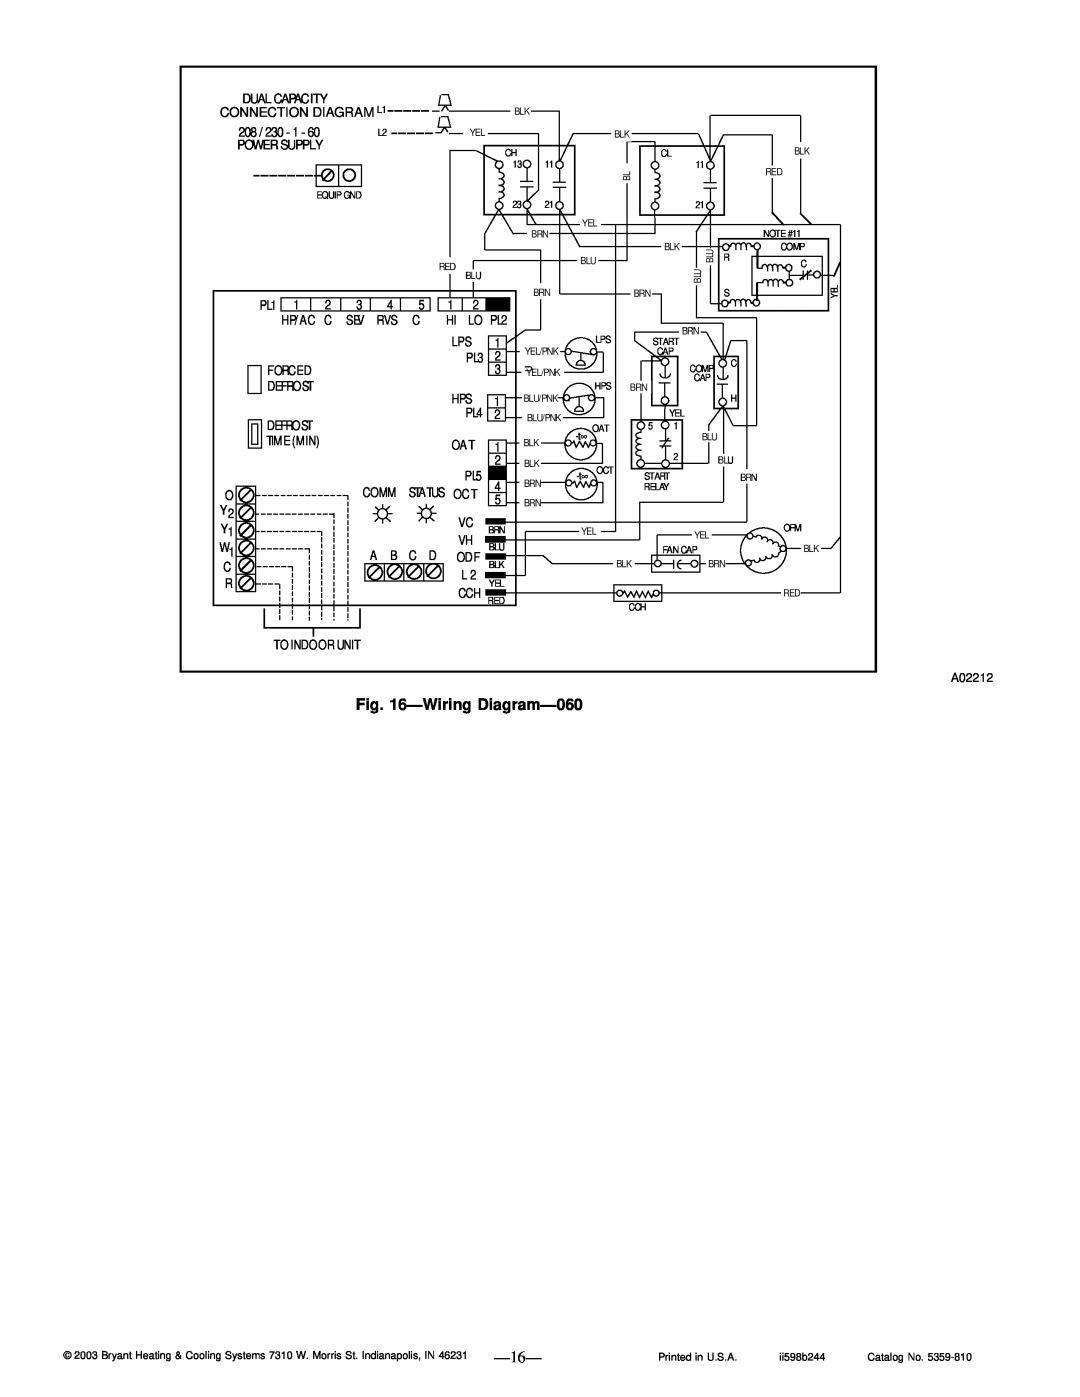 Bryant 598B instruction manual Wiring Diagram-060, Dual Capacity, CONNECTION DIAGRAM L1, Status Oct, A02212 